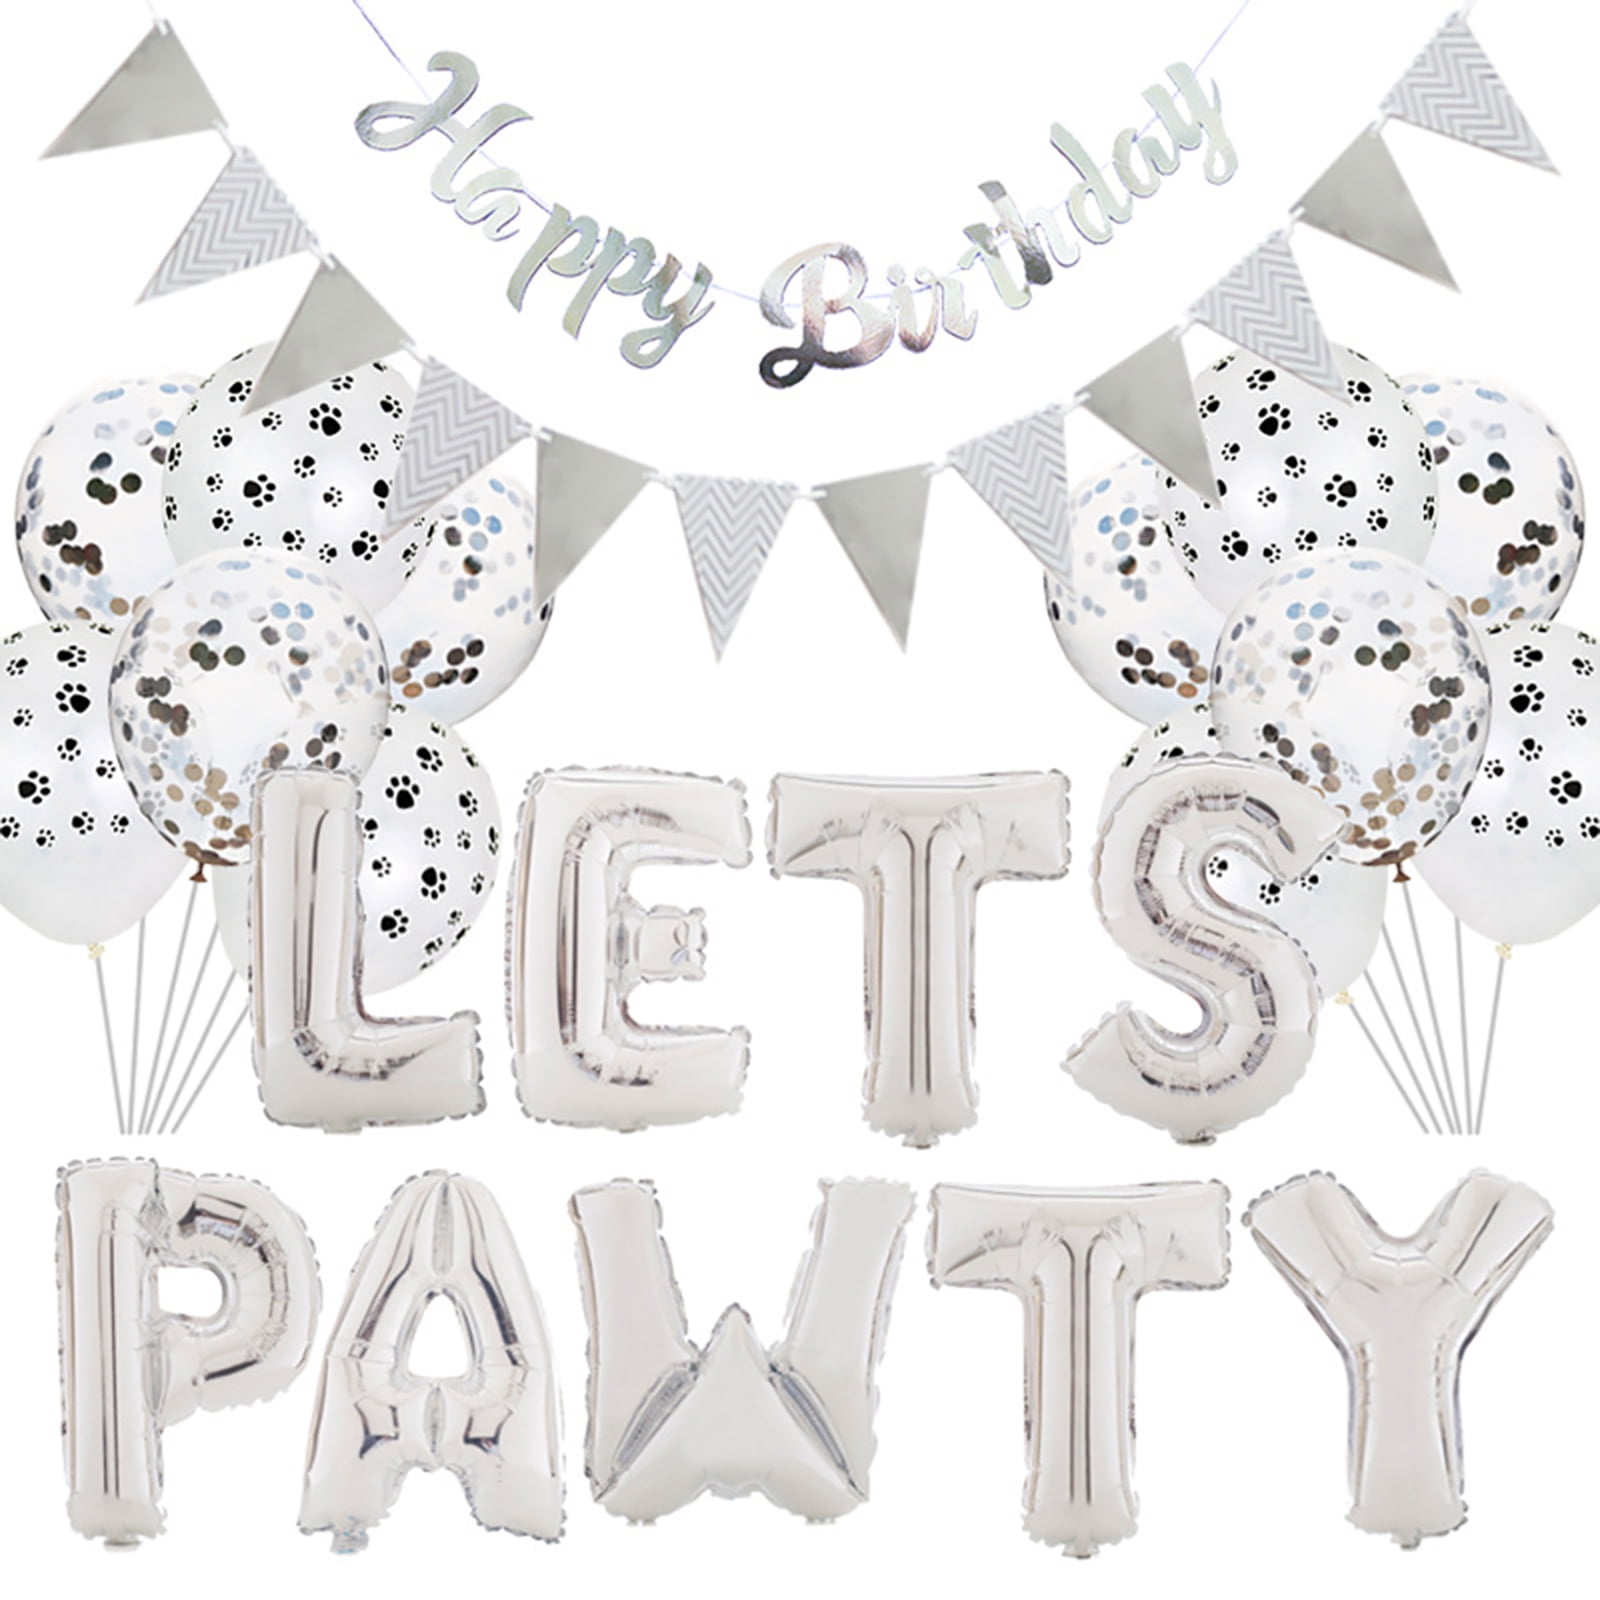 great-fyl 23pcs/set Pet Party Decoration Kit Dog Cat LETS PAWTY Balloons Birthday Banners Party Supplies